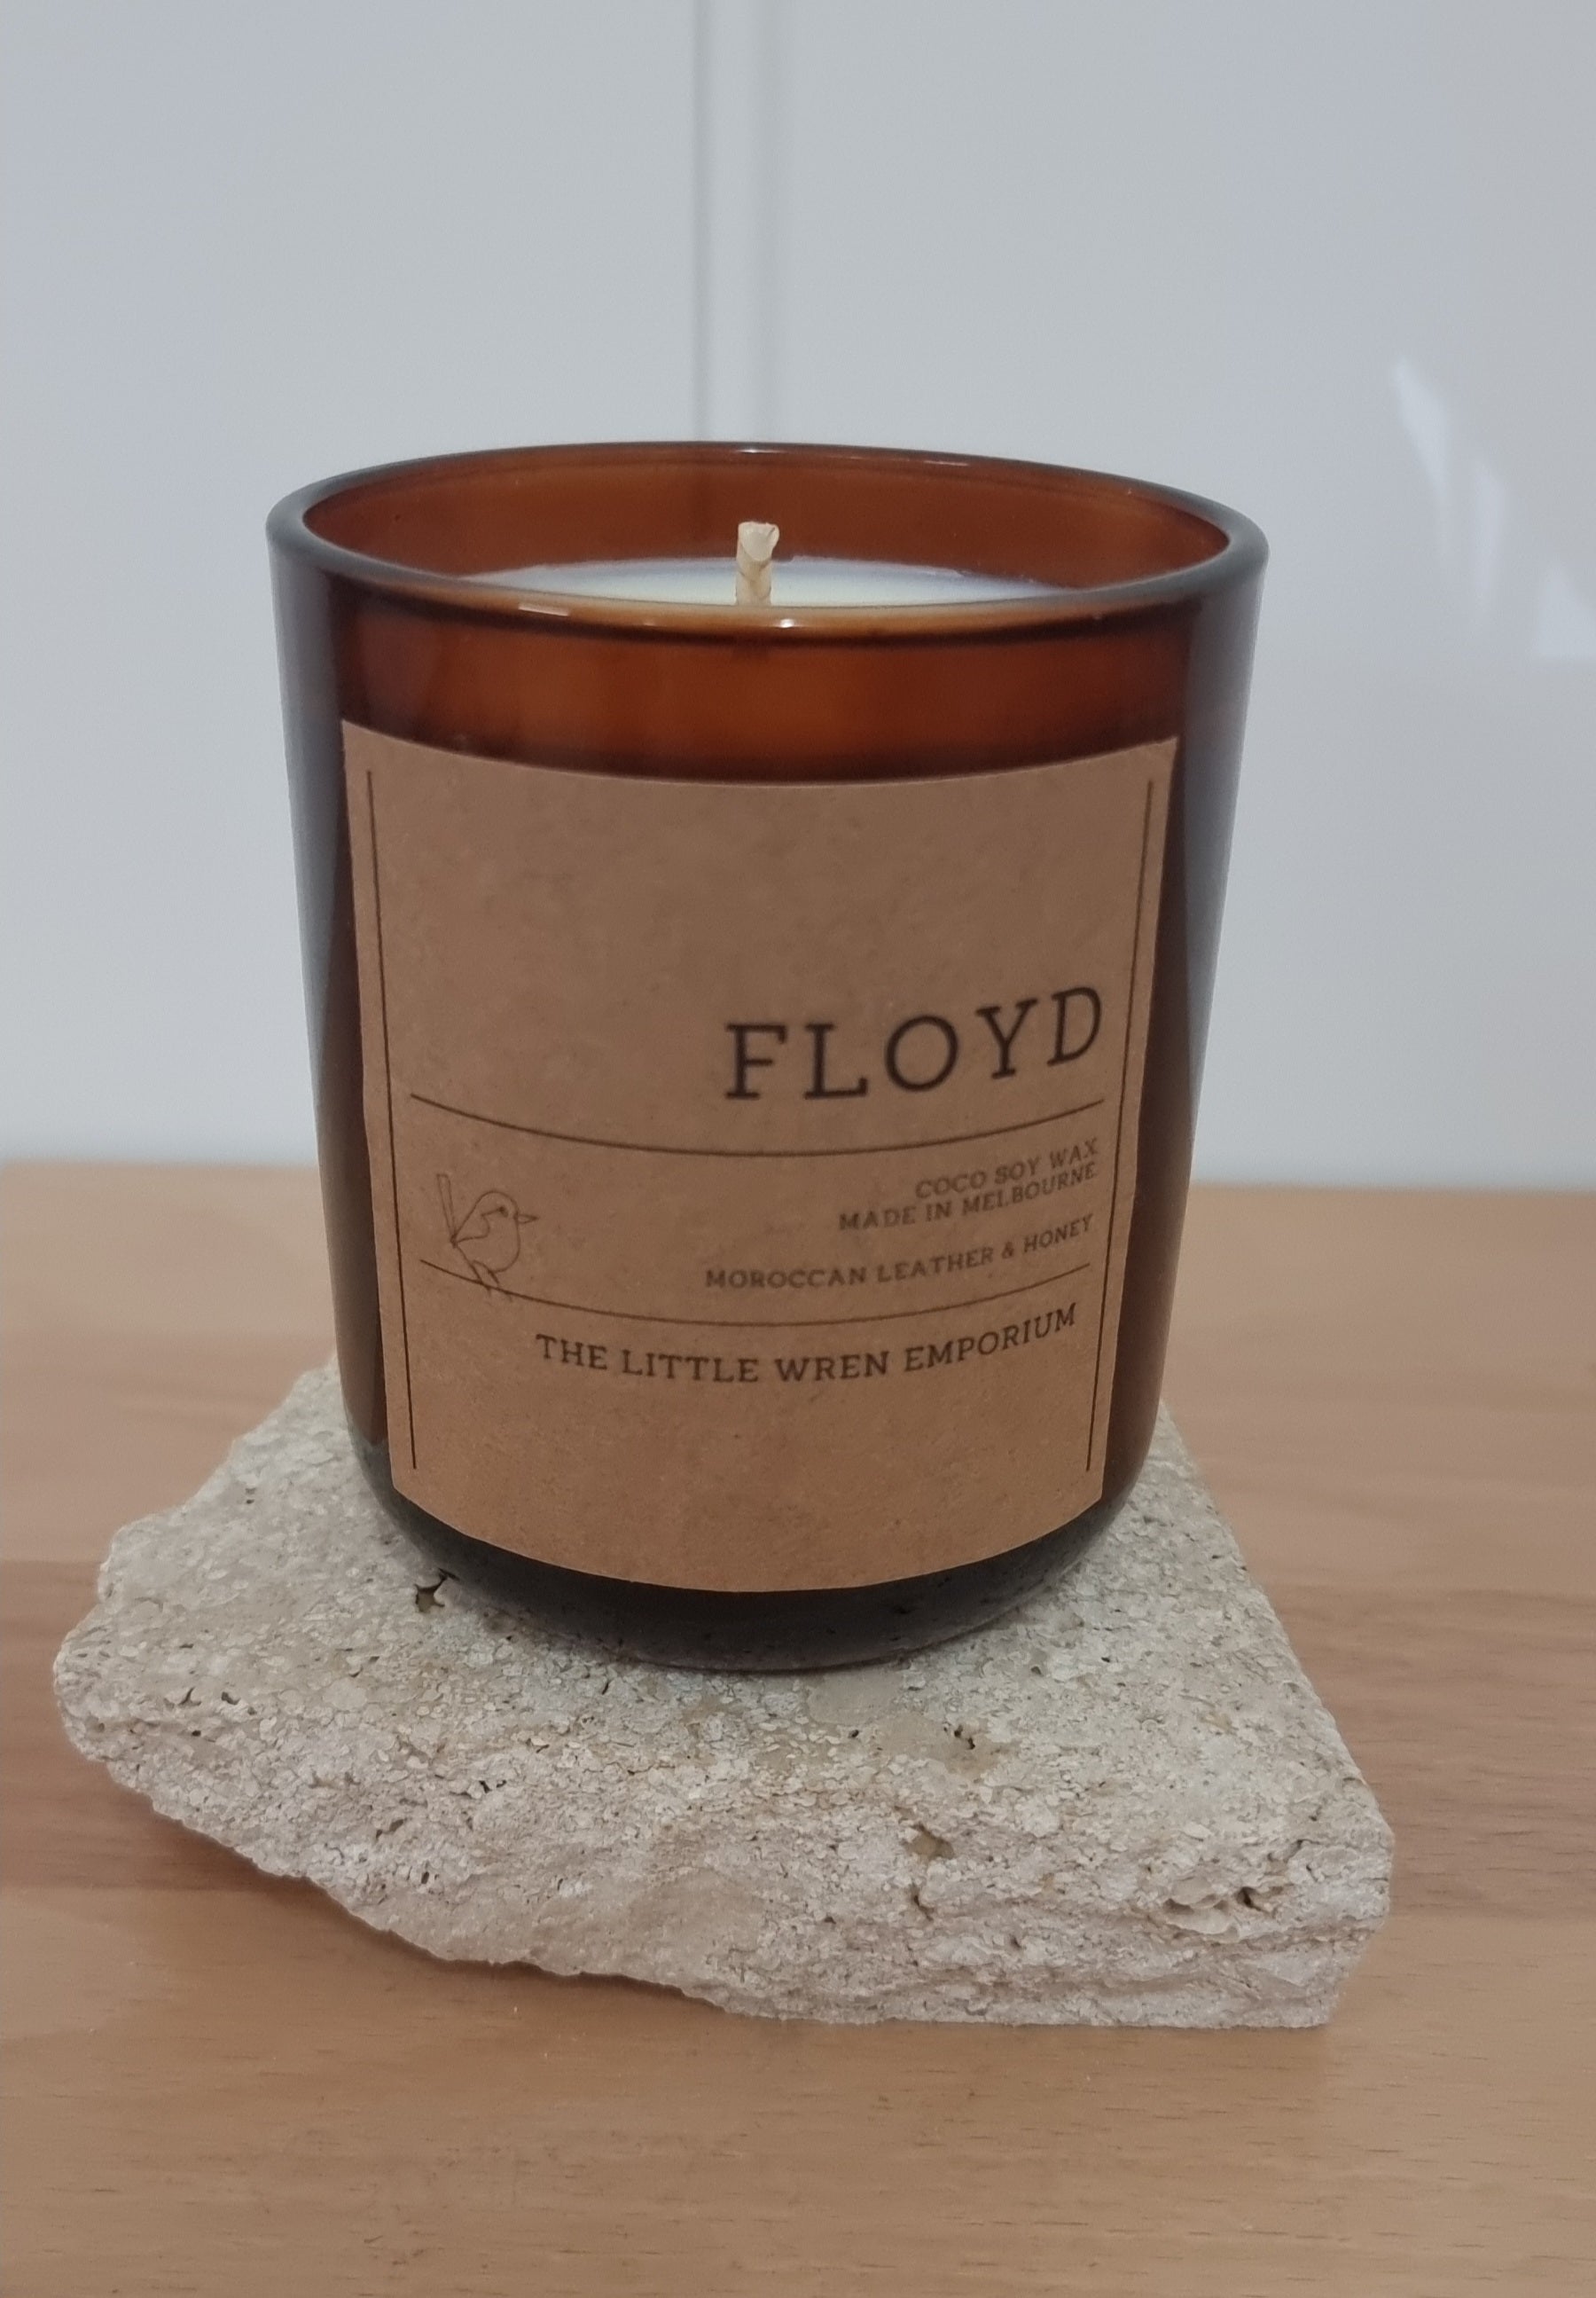 Floyd - Hand Poured Coco Soy Candle